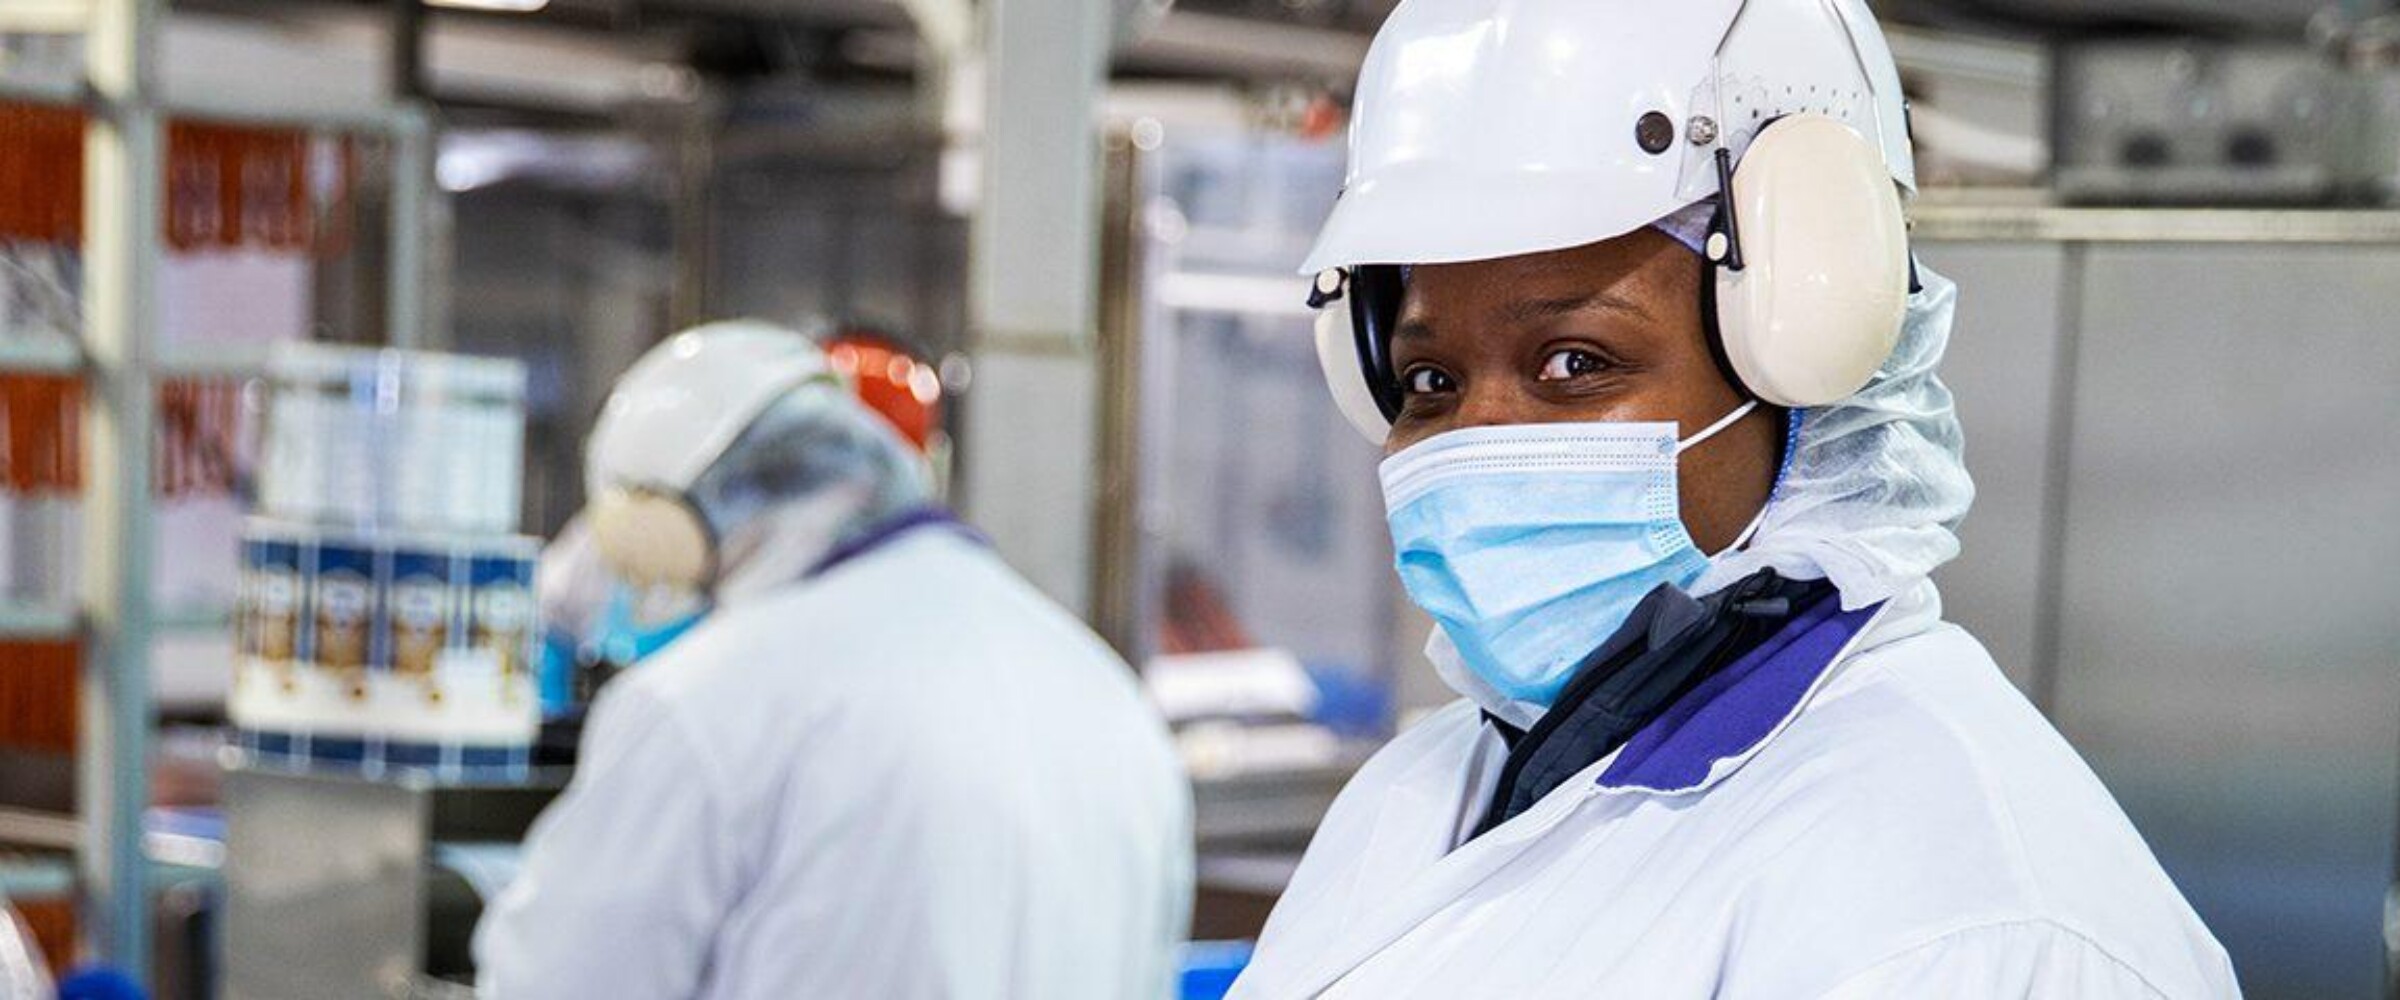 Employee looking at camera in production plant